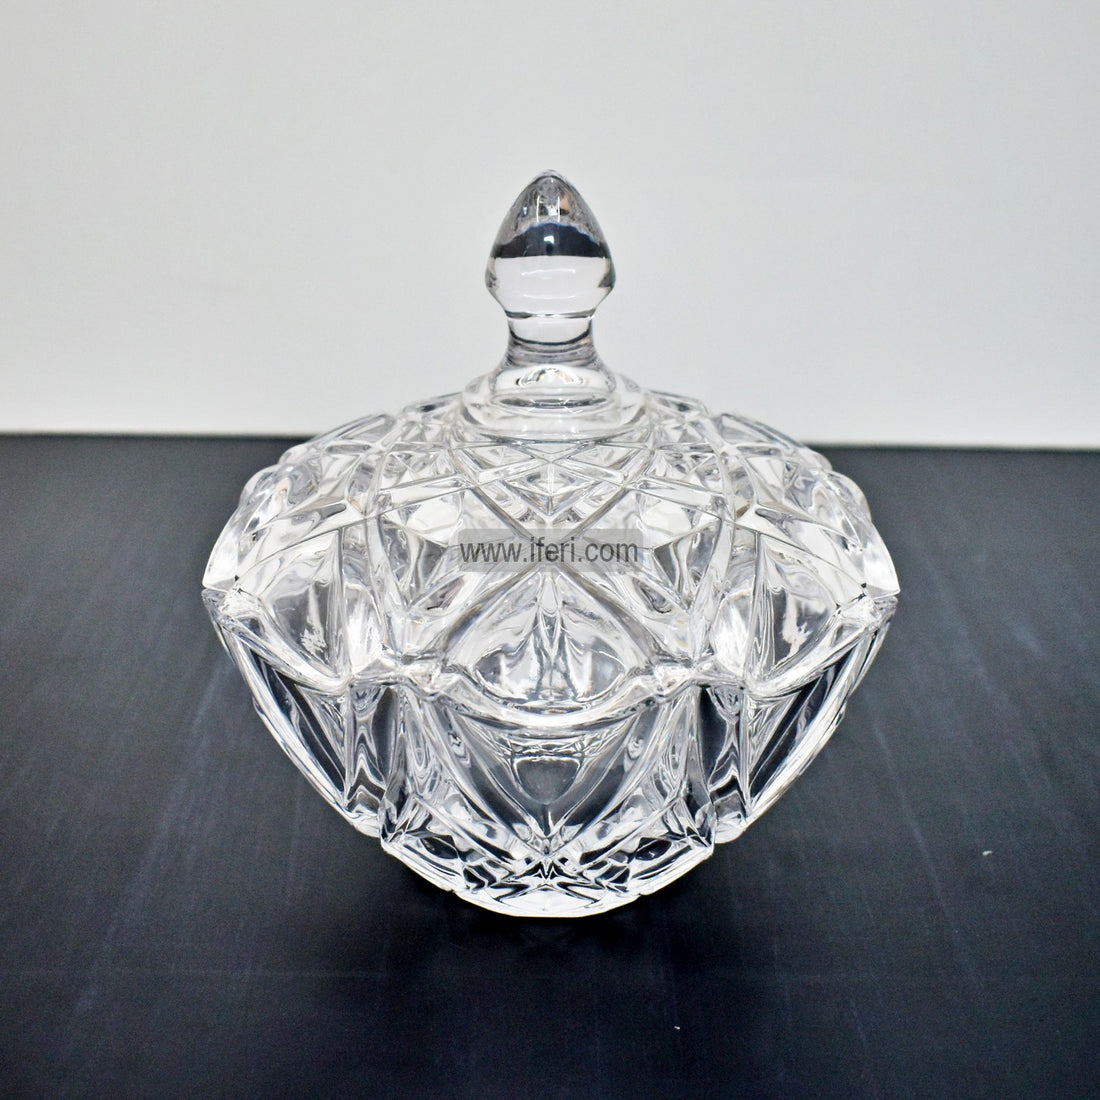 Buy Crystal Glass Candy Box, Candy Pot Tray in Online Through iferi.com from Bangladesh